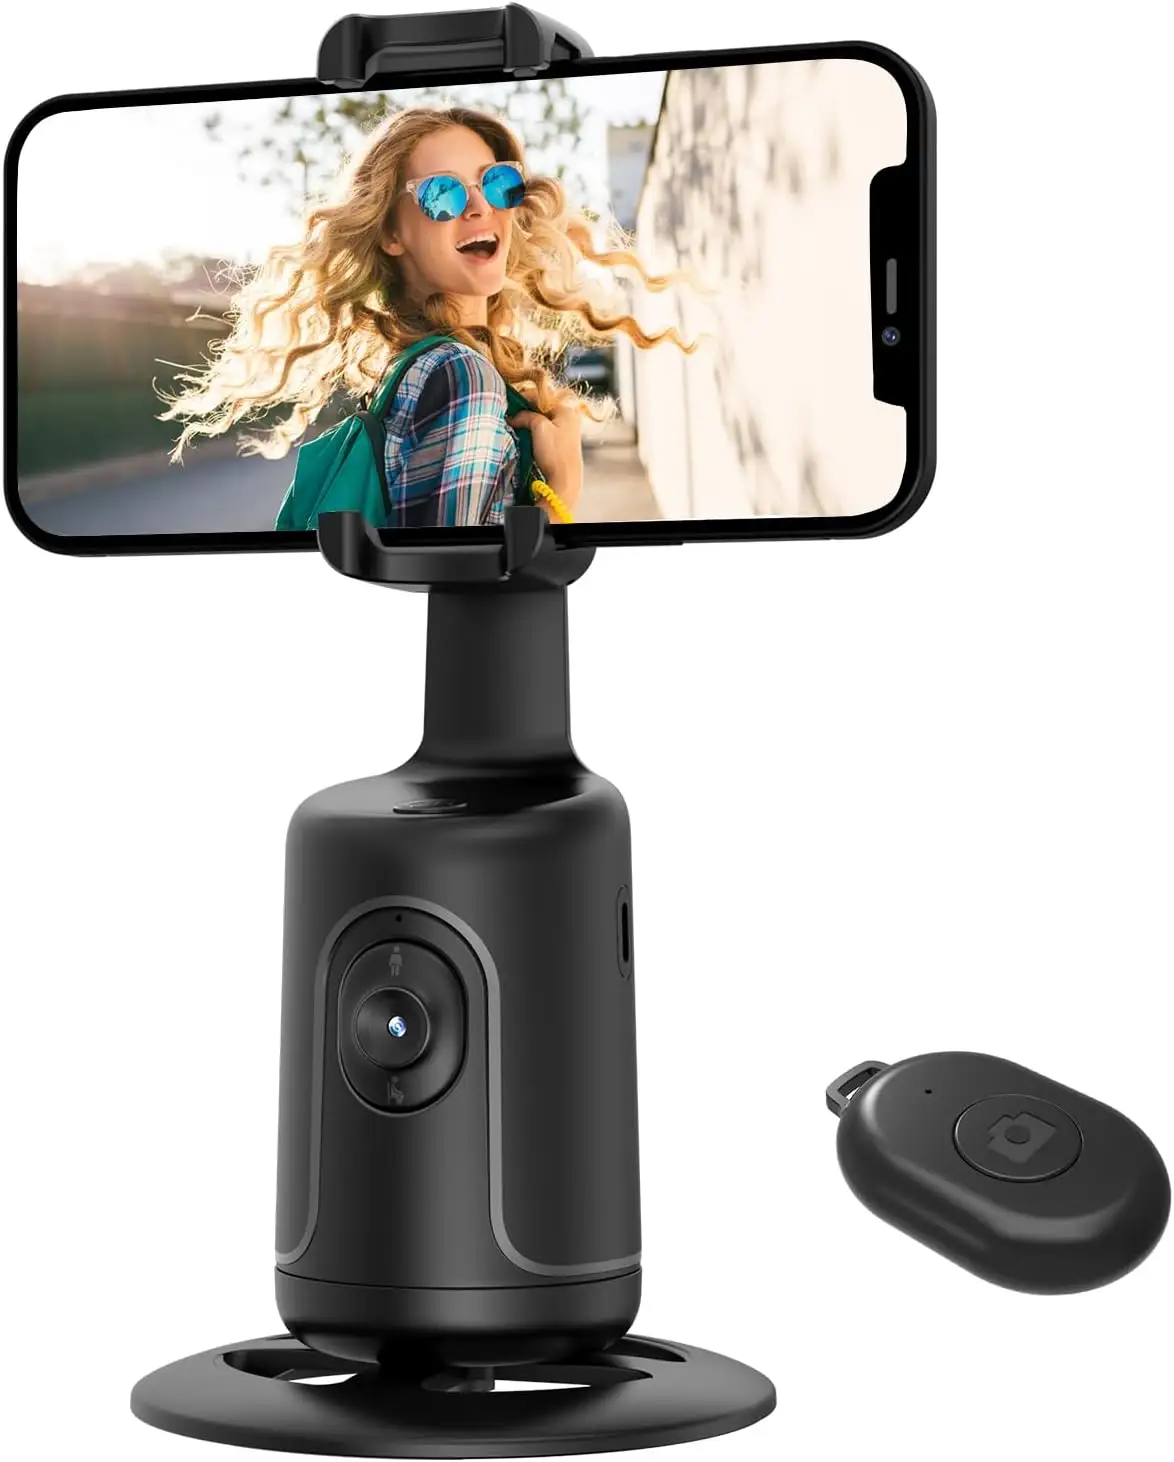 Auto Face Tracking Tripod 360 Rotation Face Body Phone Camera Mount Smart Shooting Phone Tracking Holder